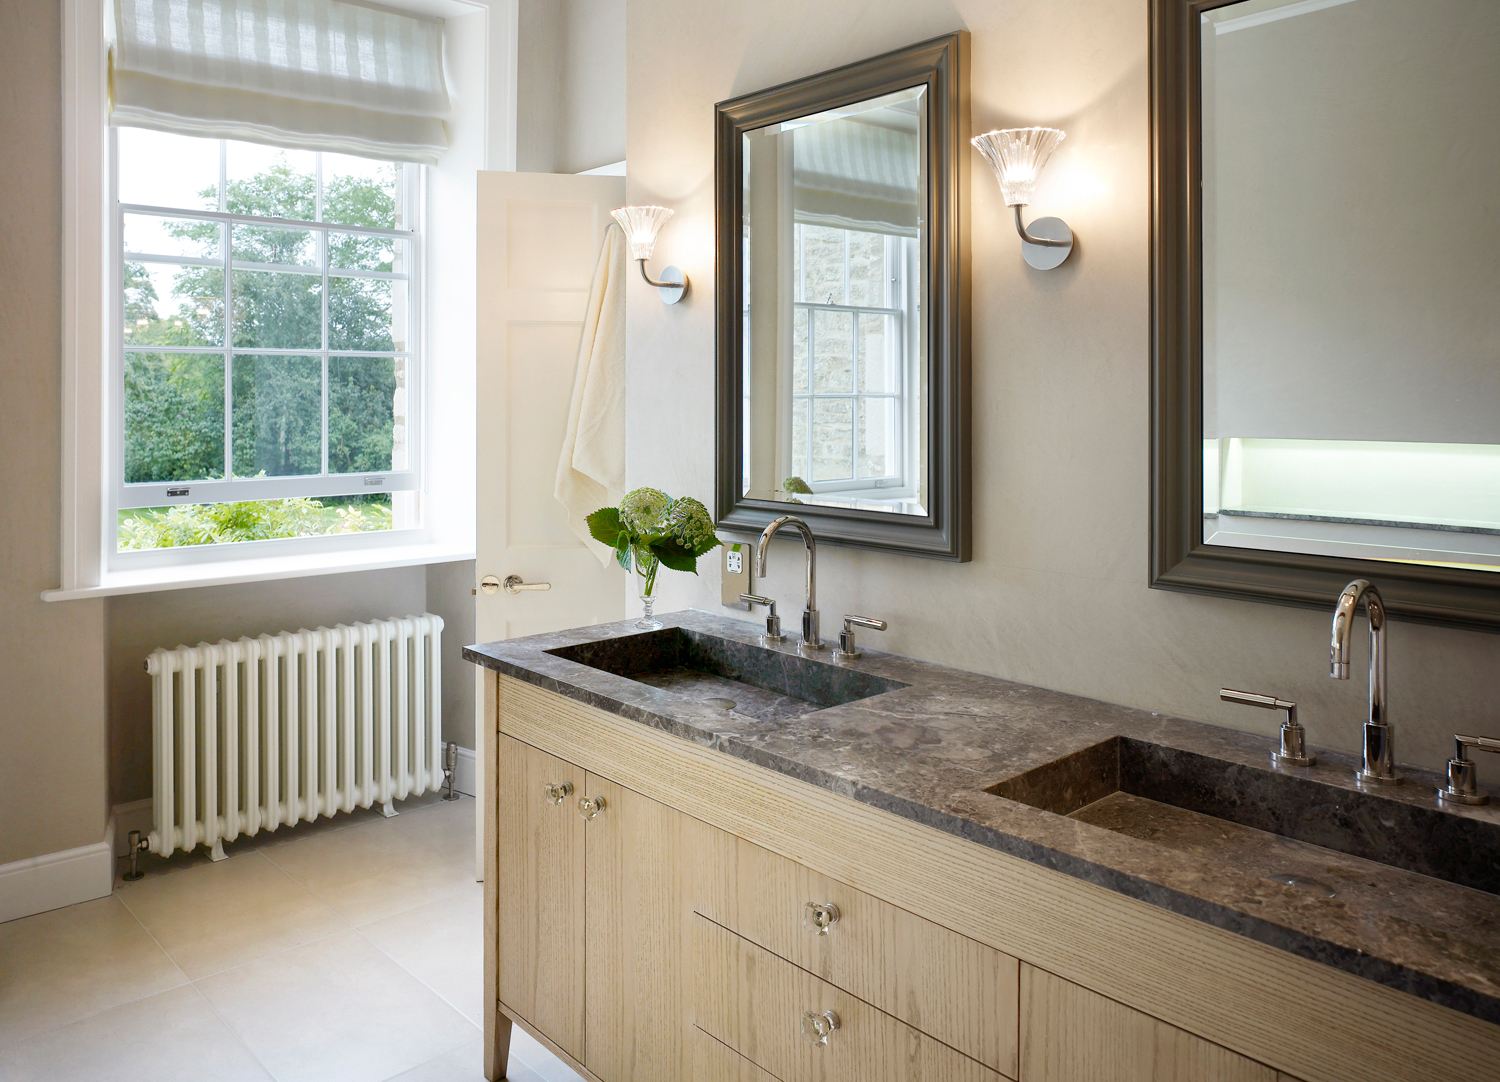 Jill Scholes Interior Design, Oxfordshire Country House, master bathroom double basin with bespoke cabinetry